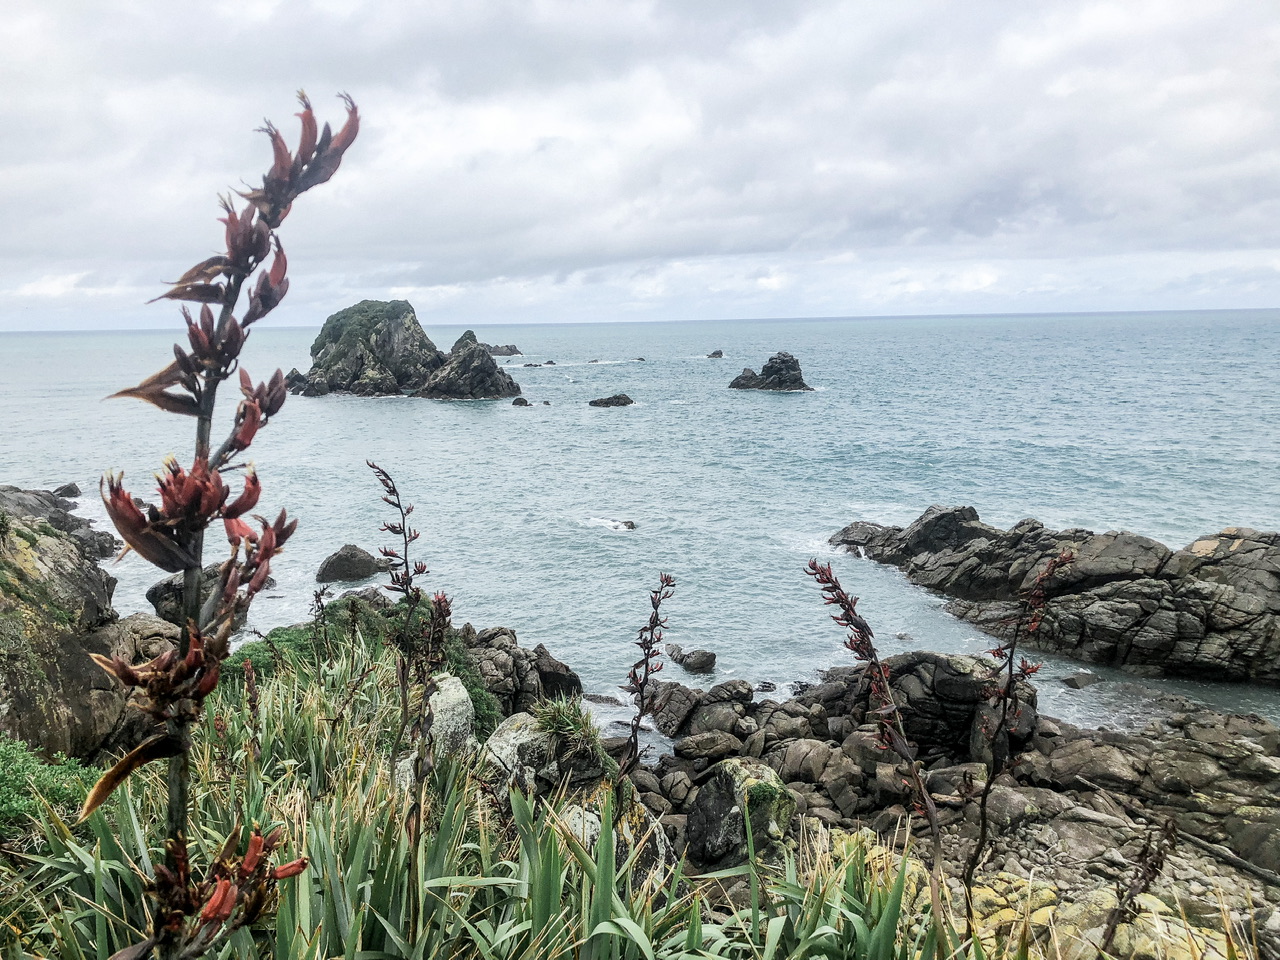 View of island over rocks with native new zealand plants on cliff side on Cape Foulwind walkway